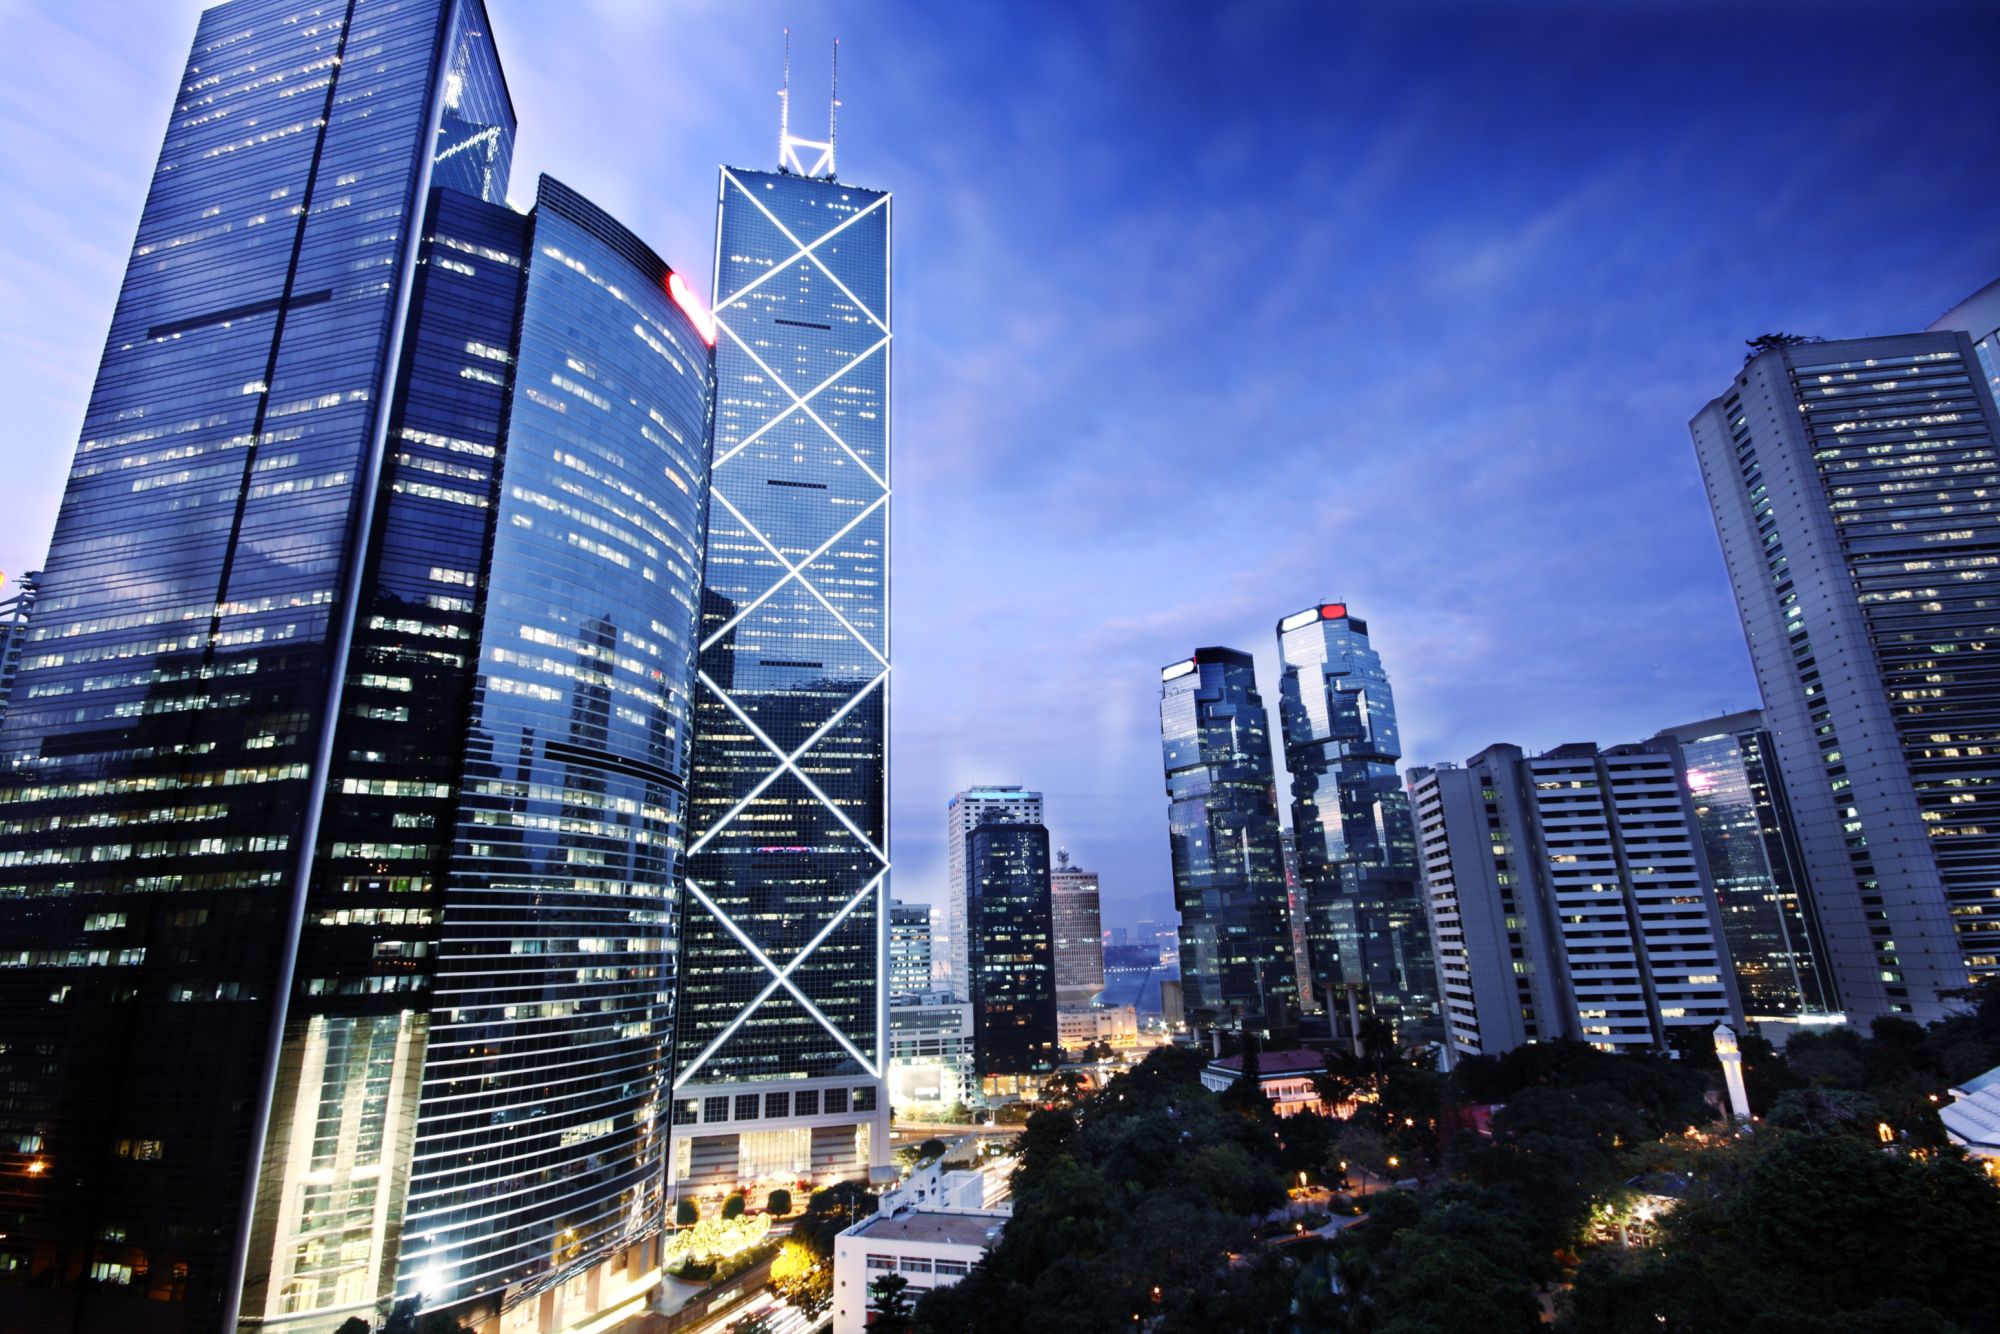 T. Rowe Price to distribute its funds to Hong Kong retail investors